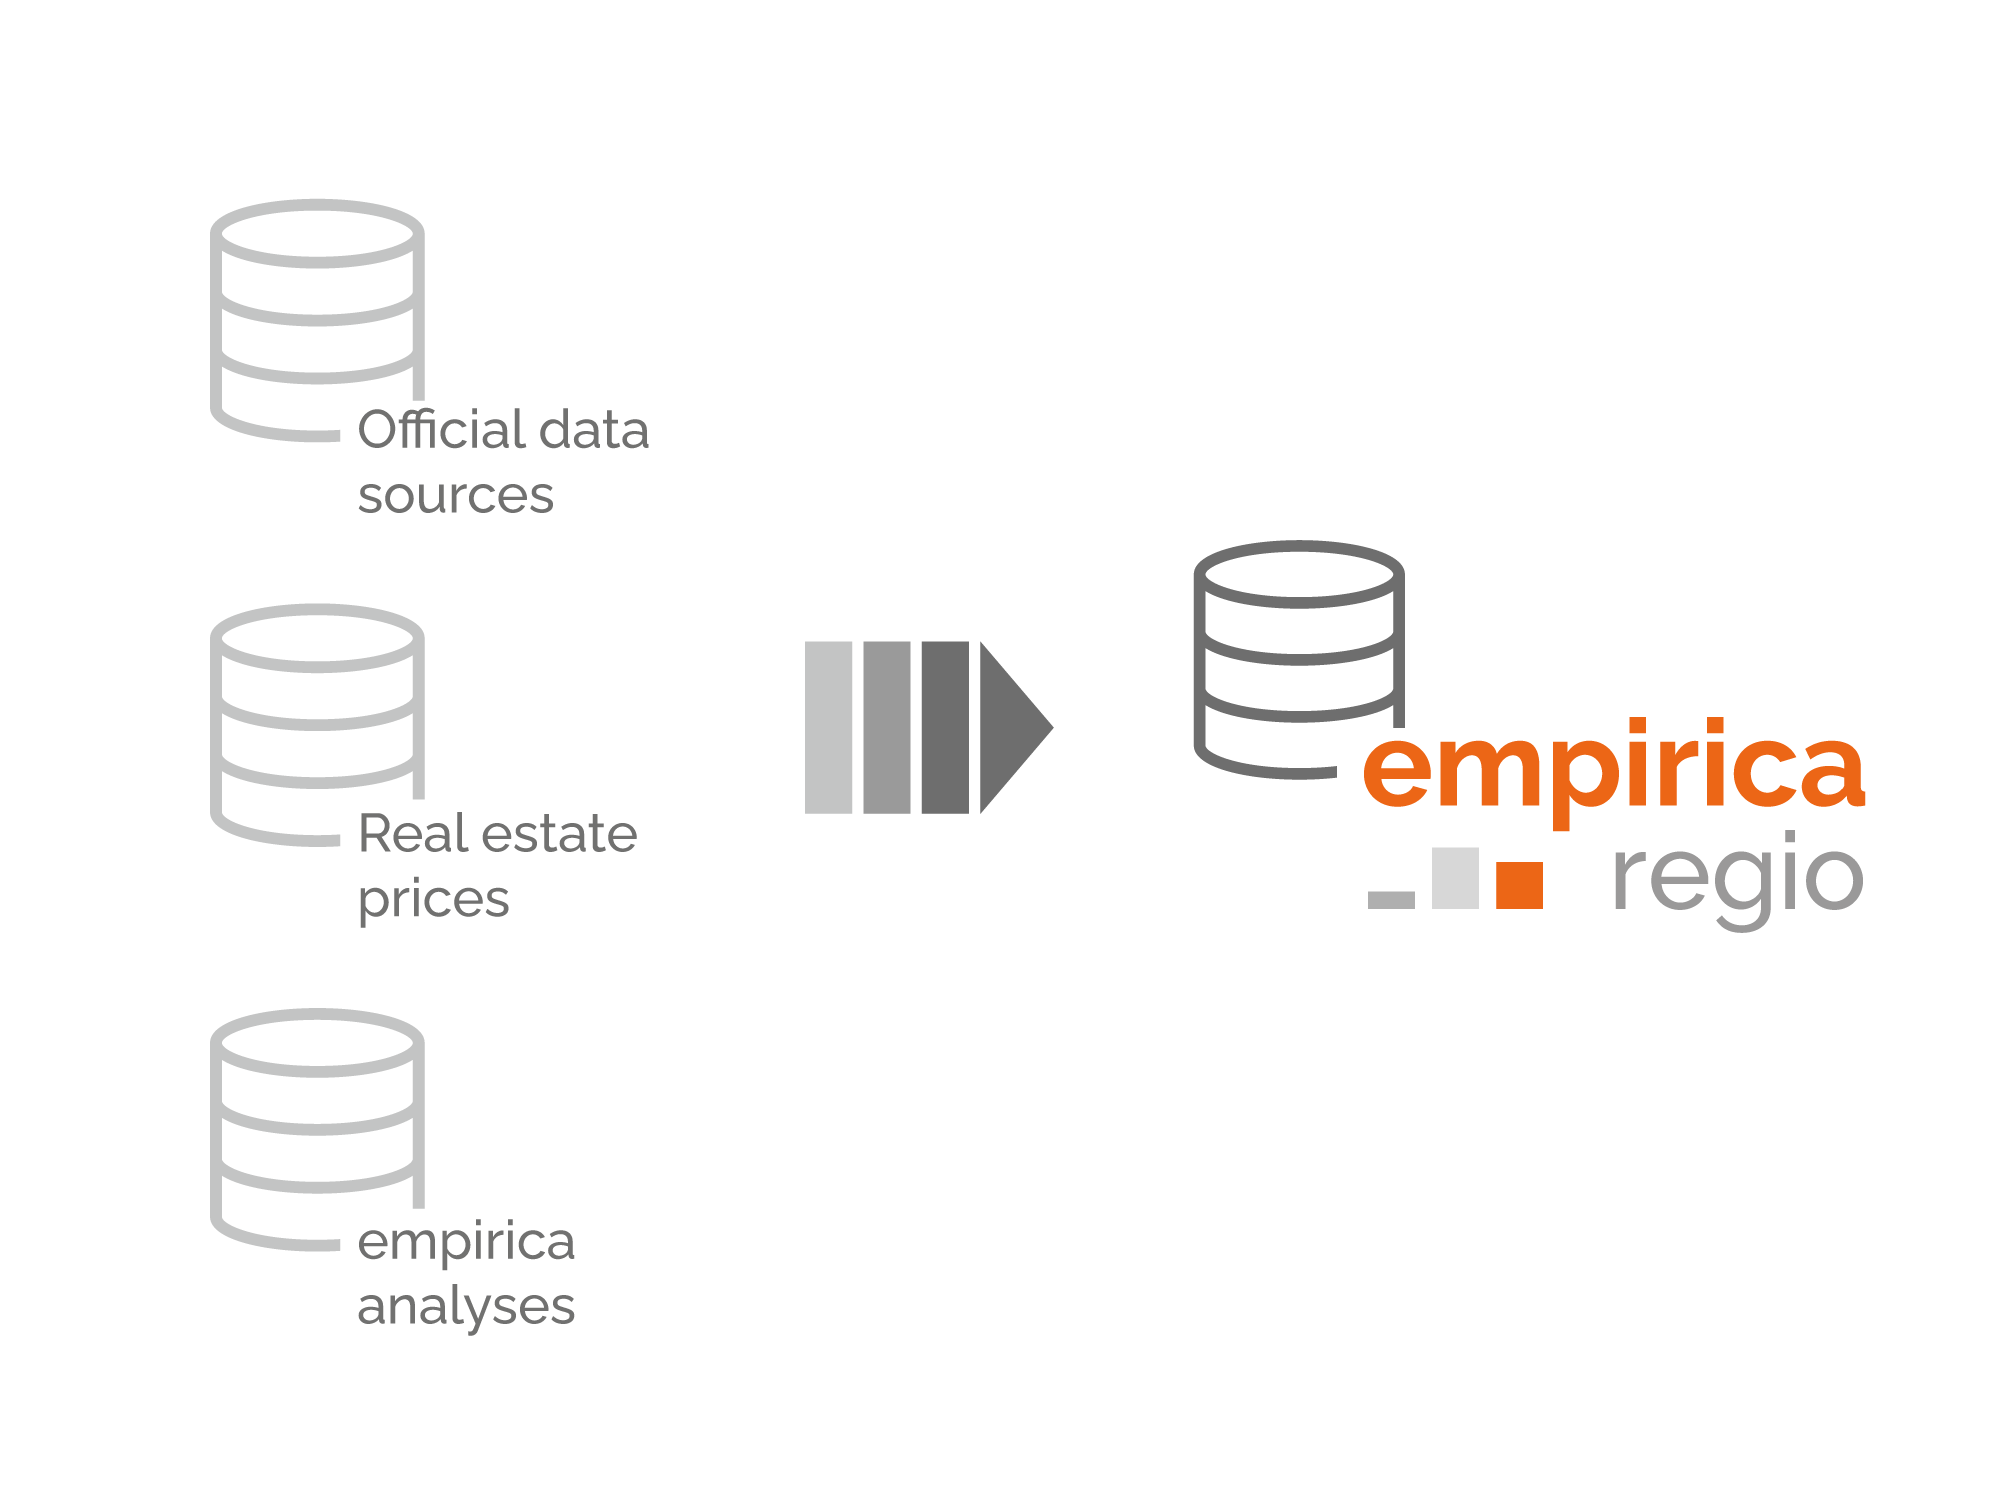 empirica regional database and data sources from official statistics, supply data and own analyses and data models